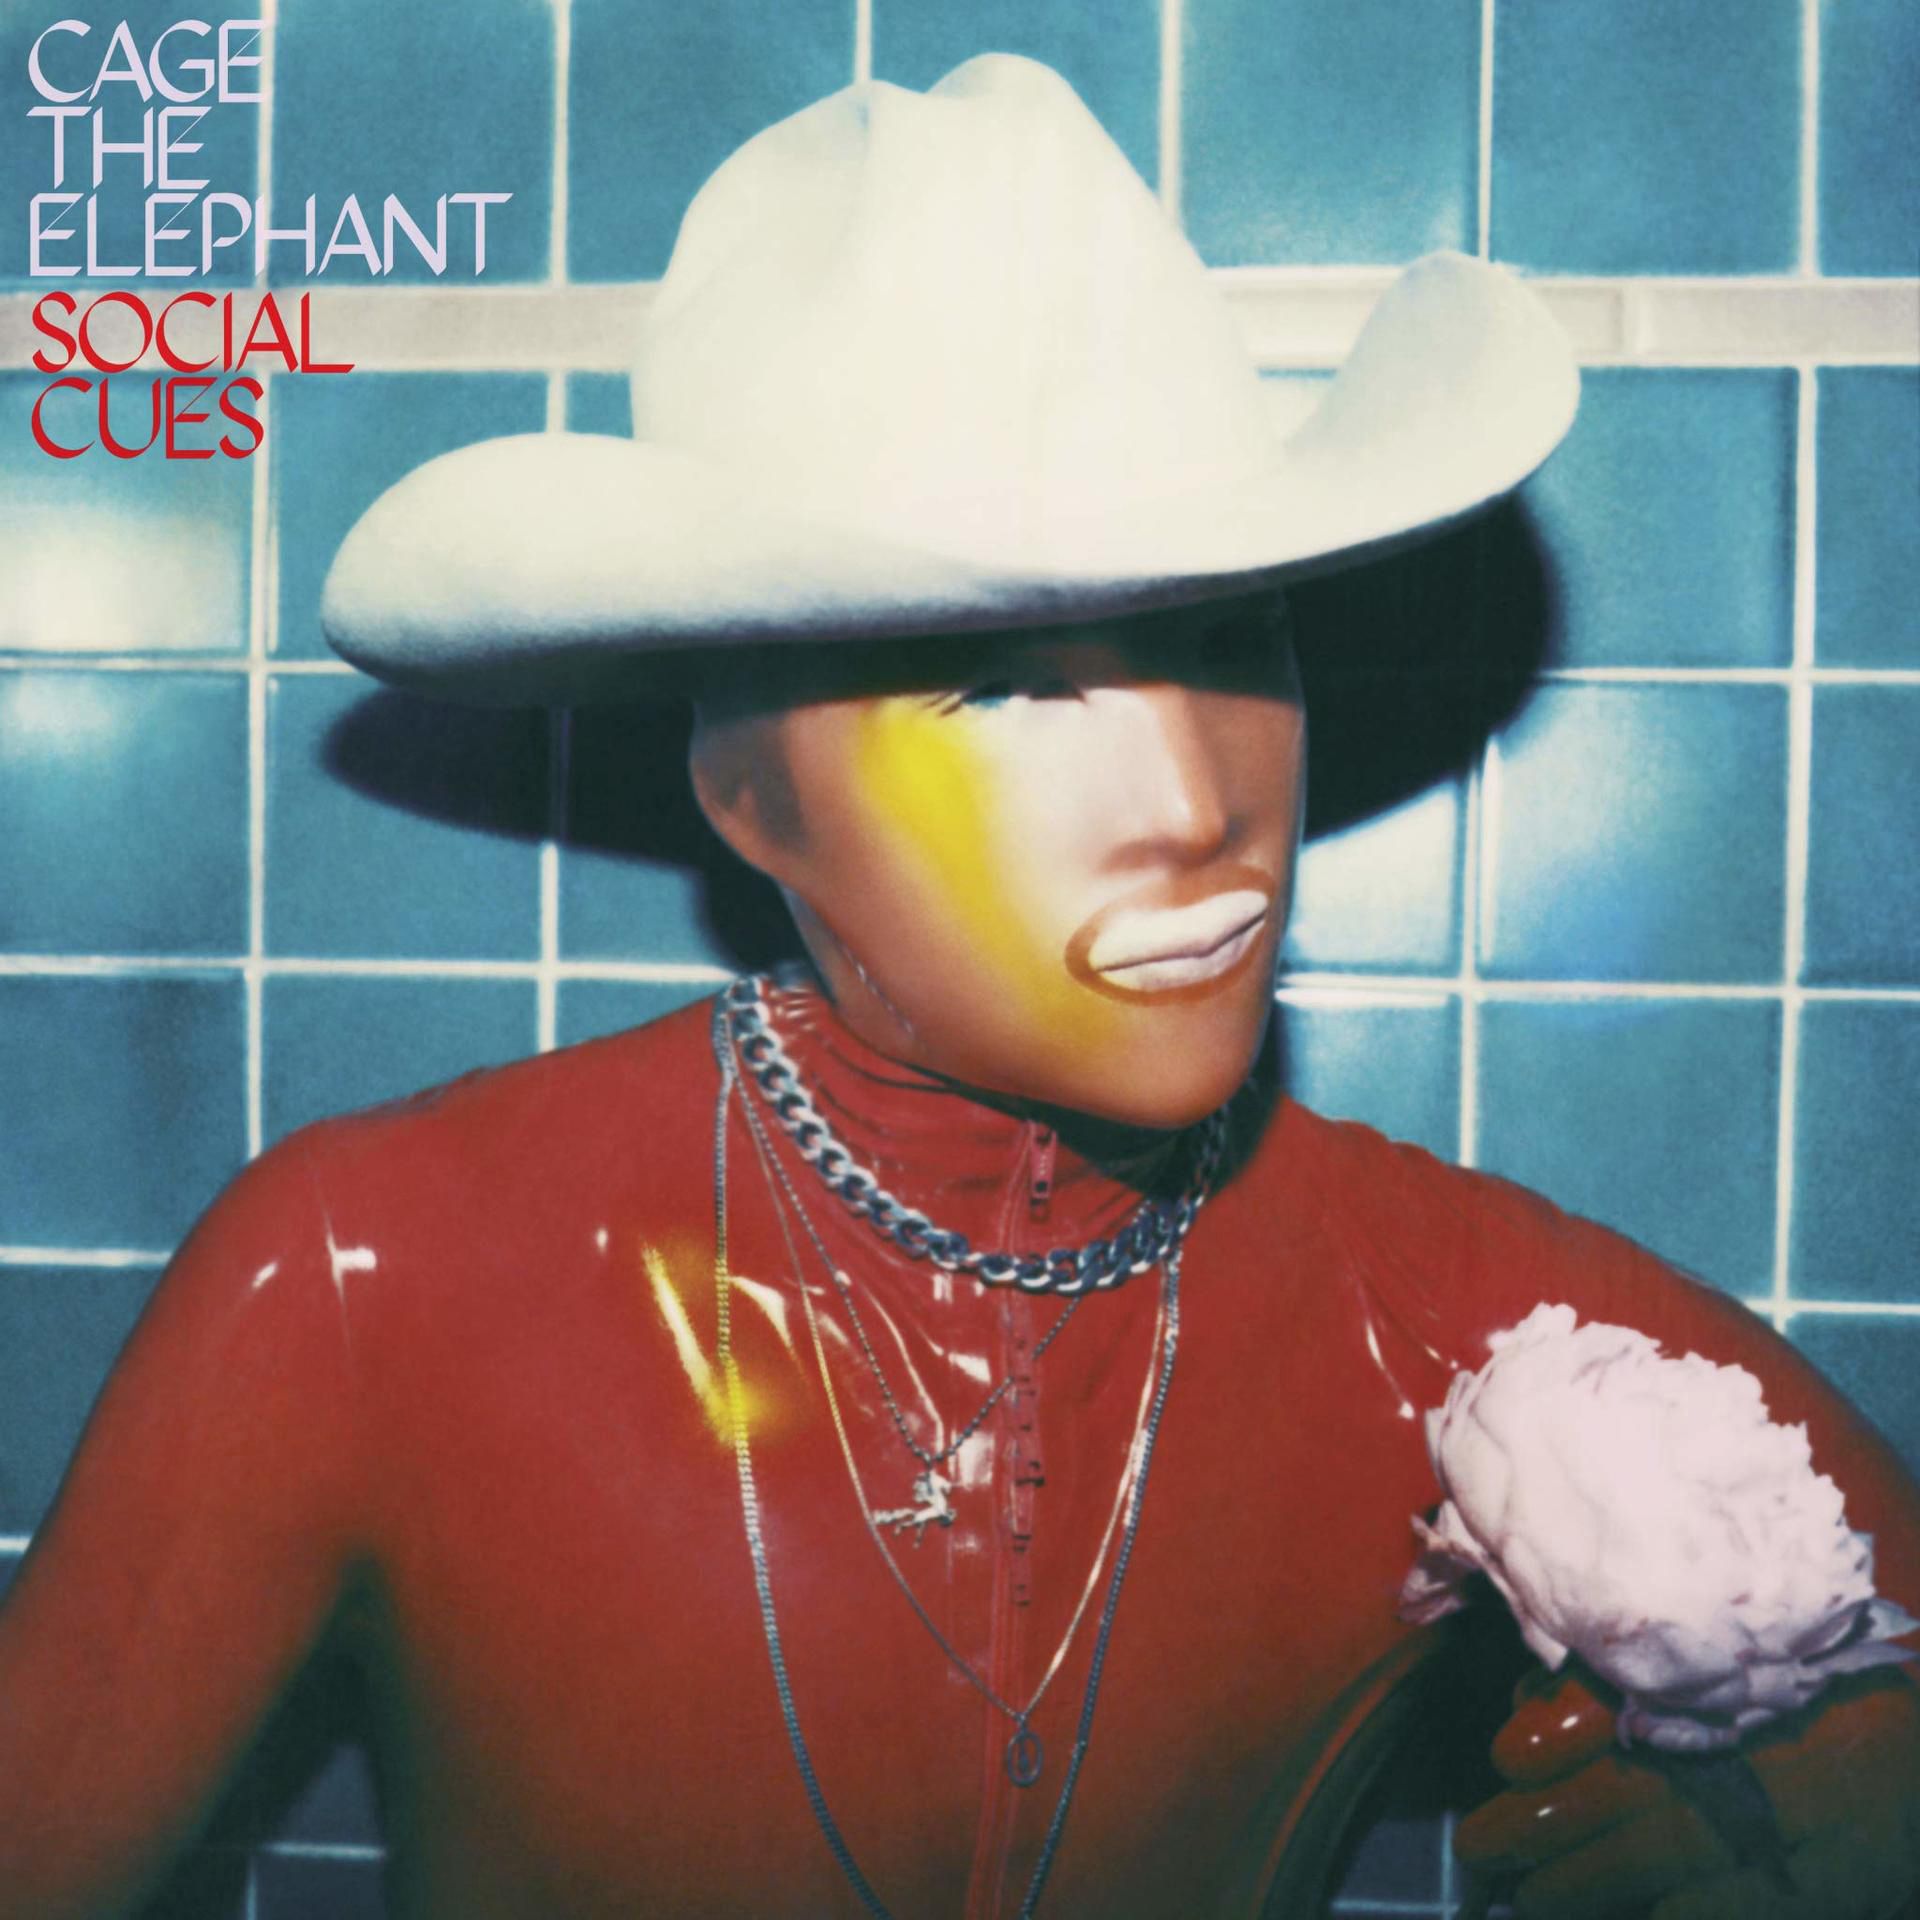 Cage The Elephant - SOCIAL (Vinyl) - CUES